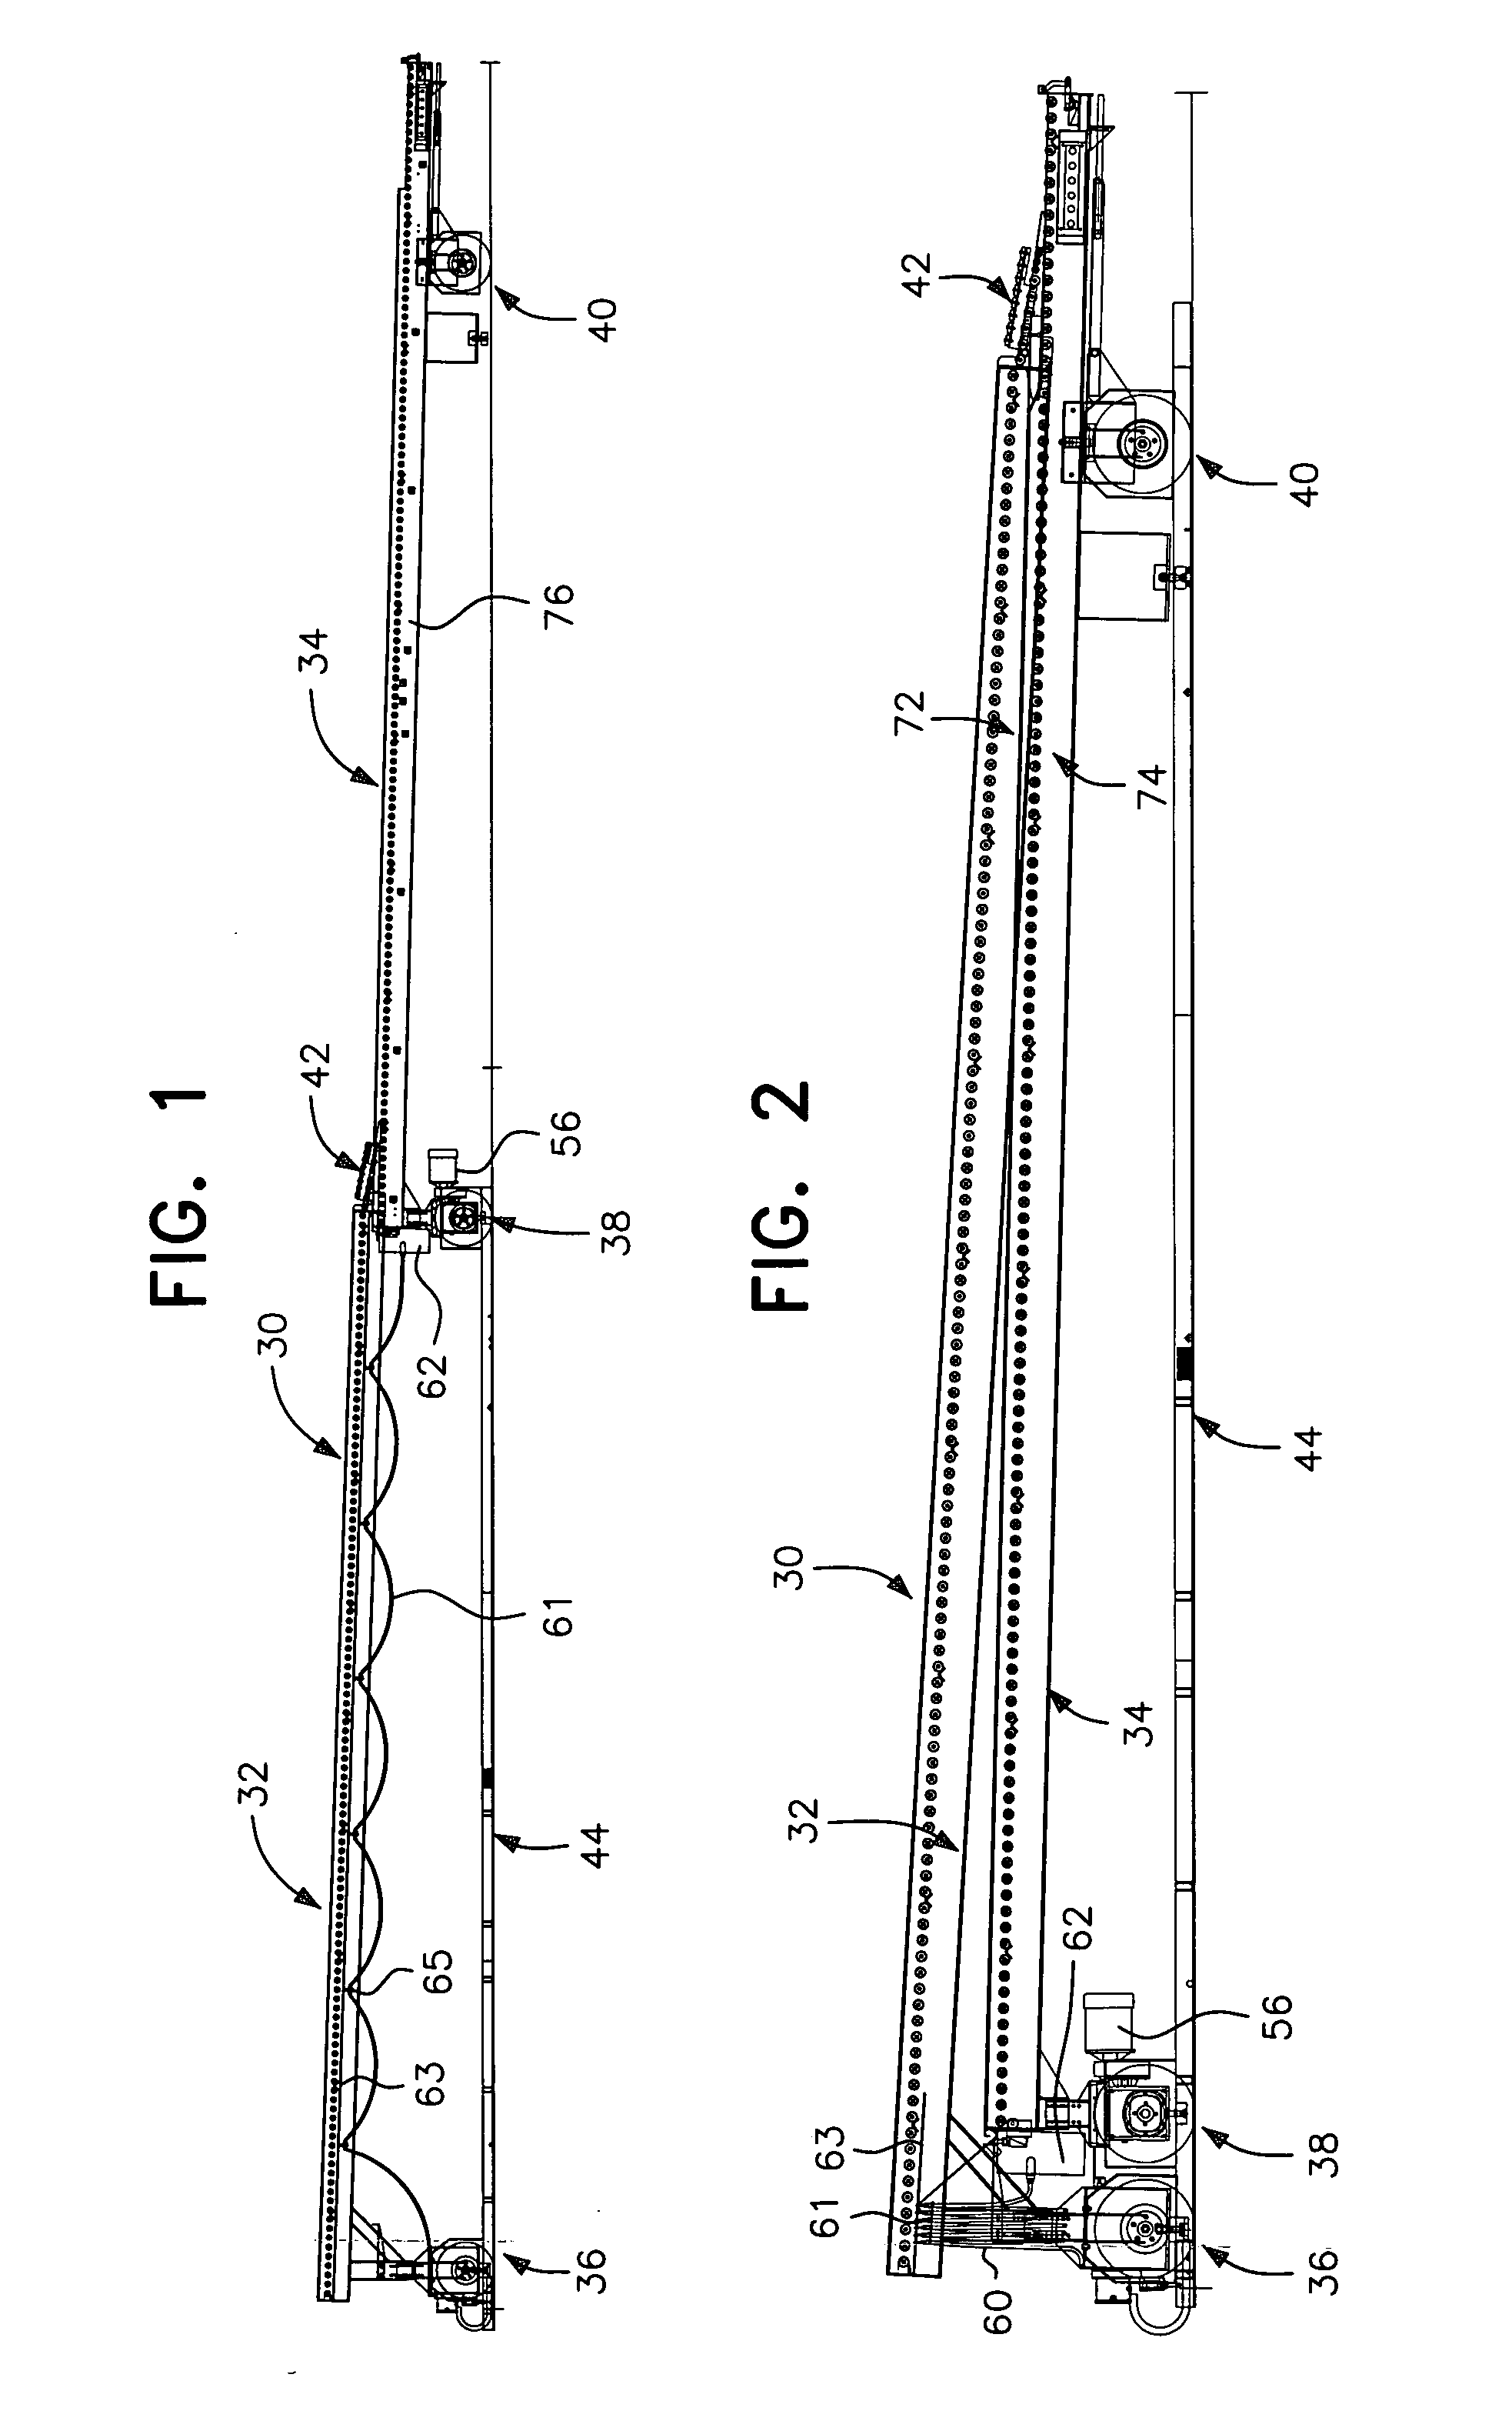 Steerable telescoping conveyor for loading parcels